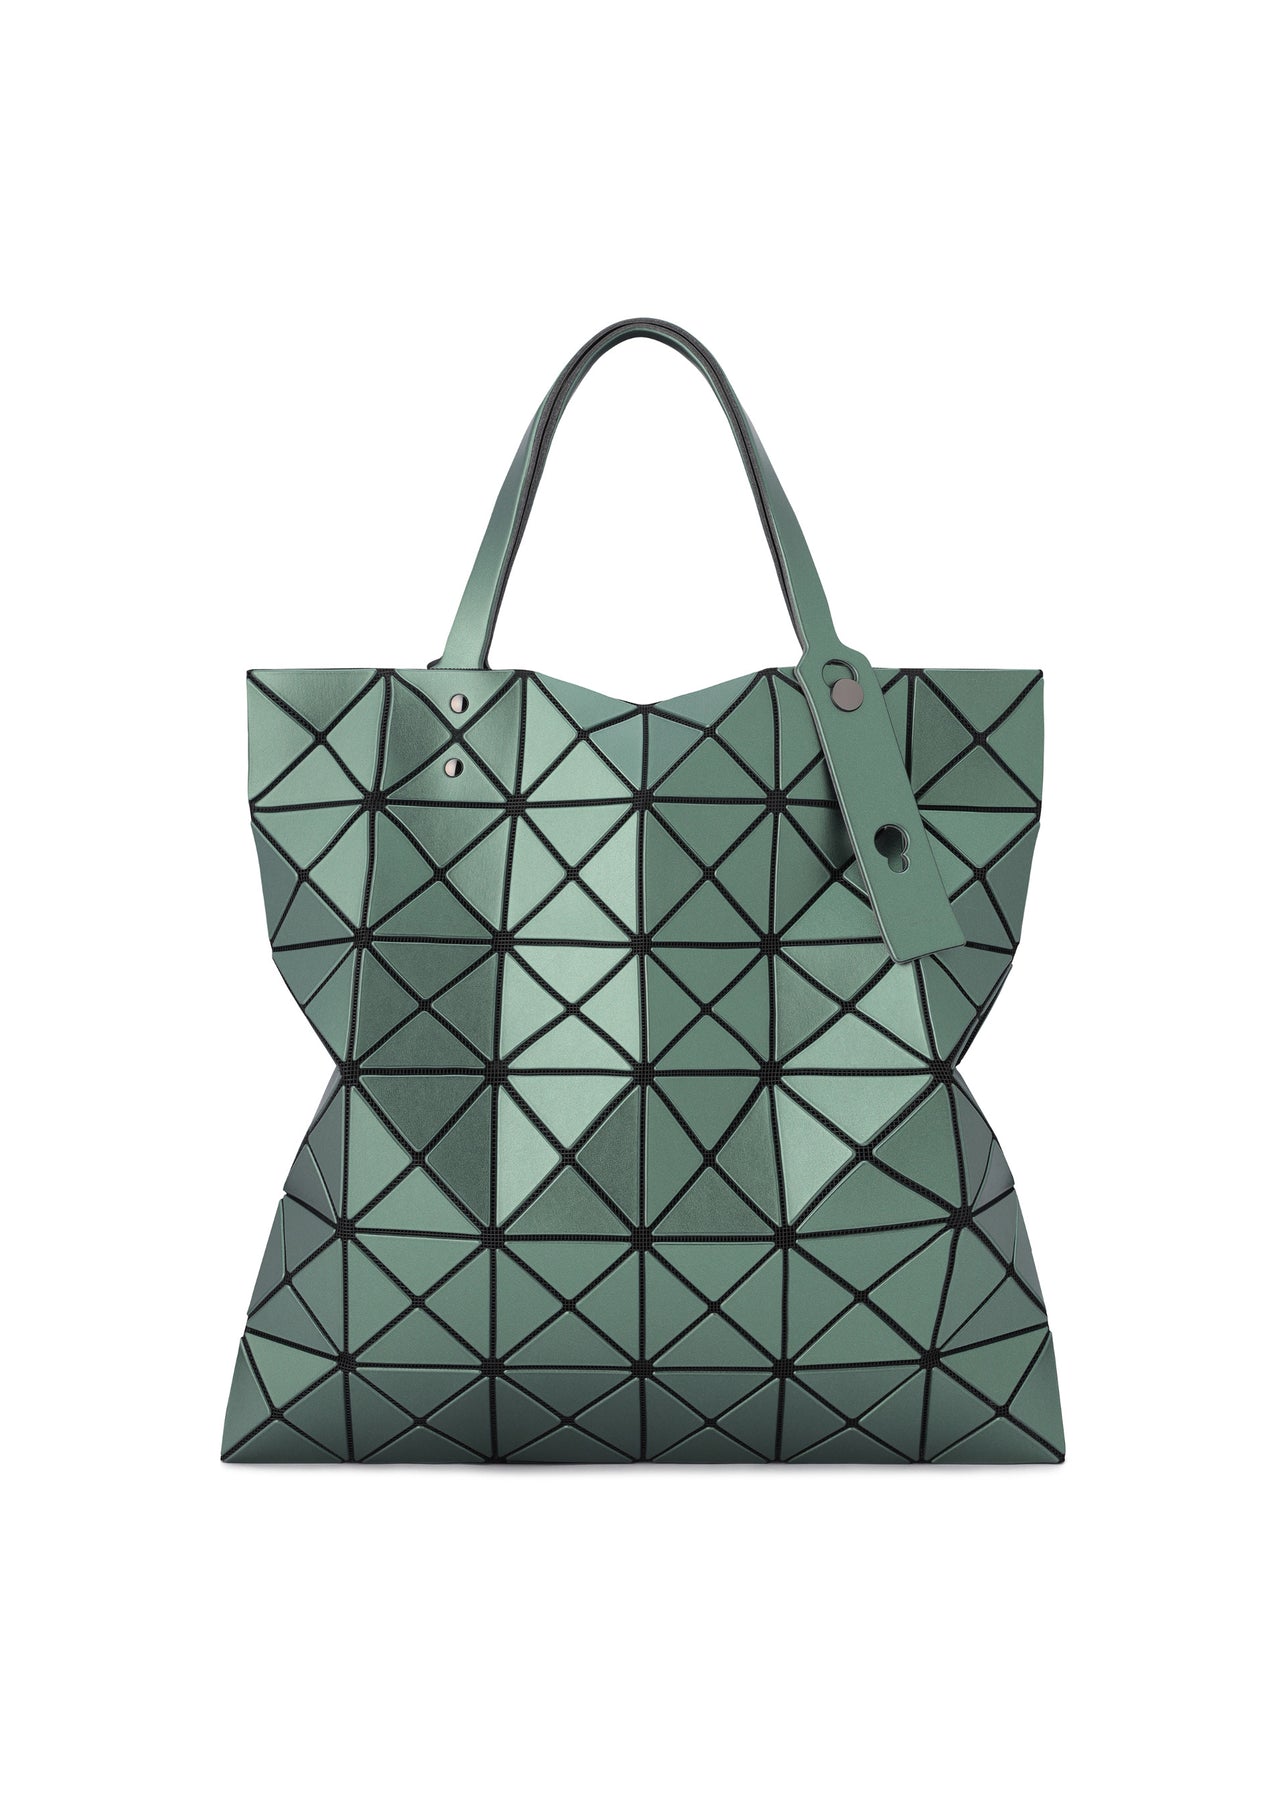 LUCENT METALLIC TOTE BAG | The official ISSEY MIYAKE ONLINE STORE